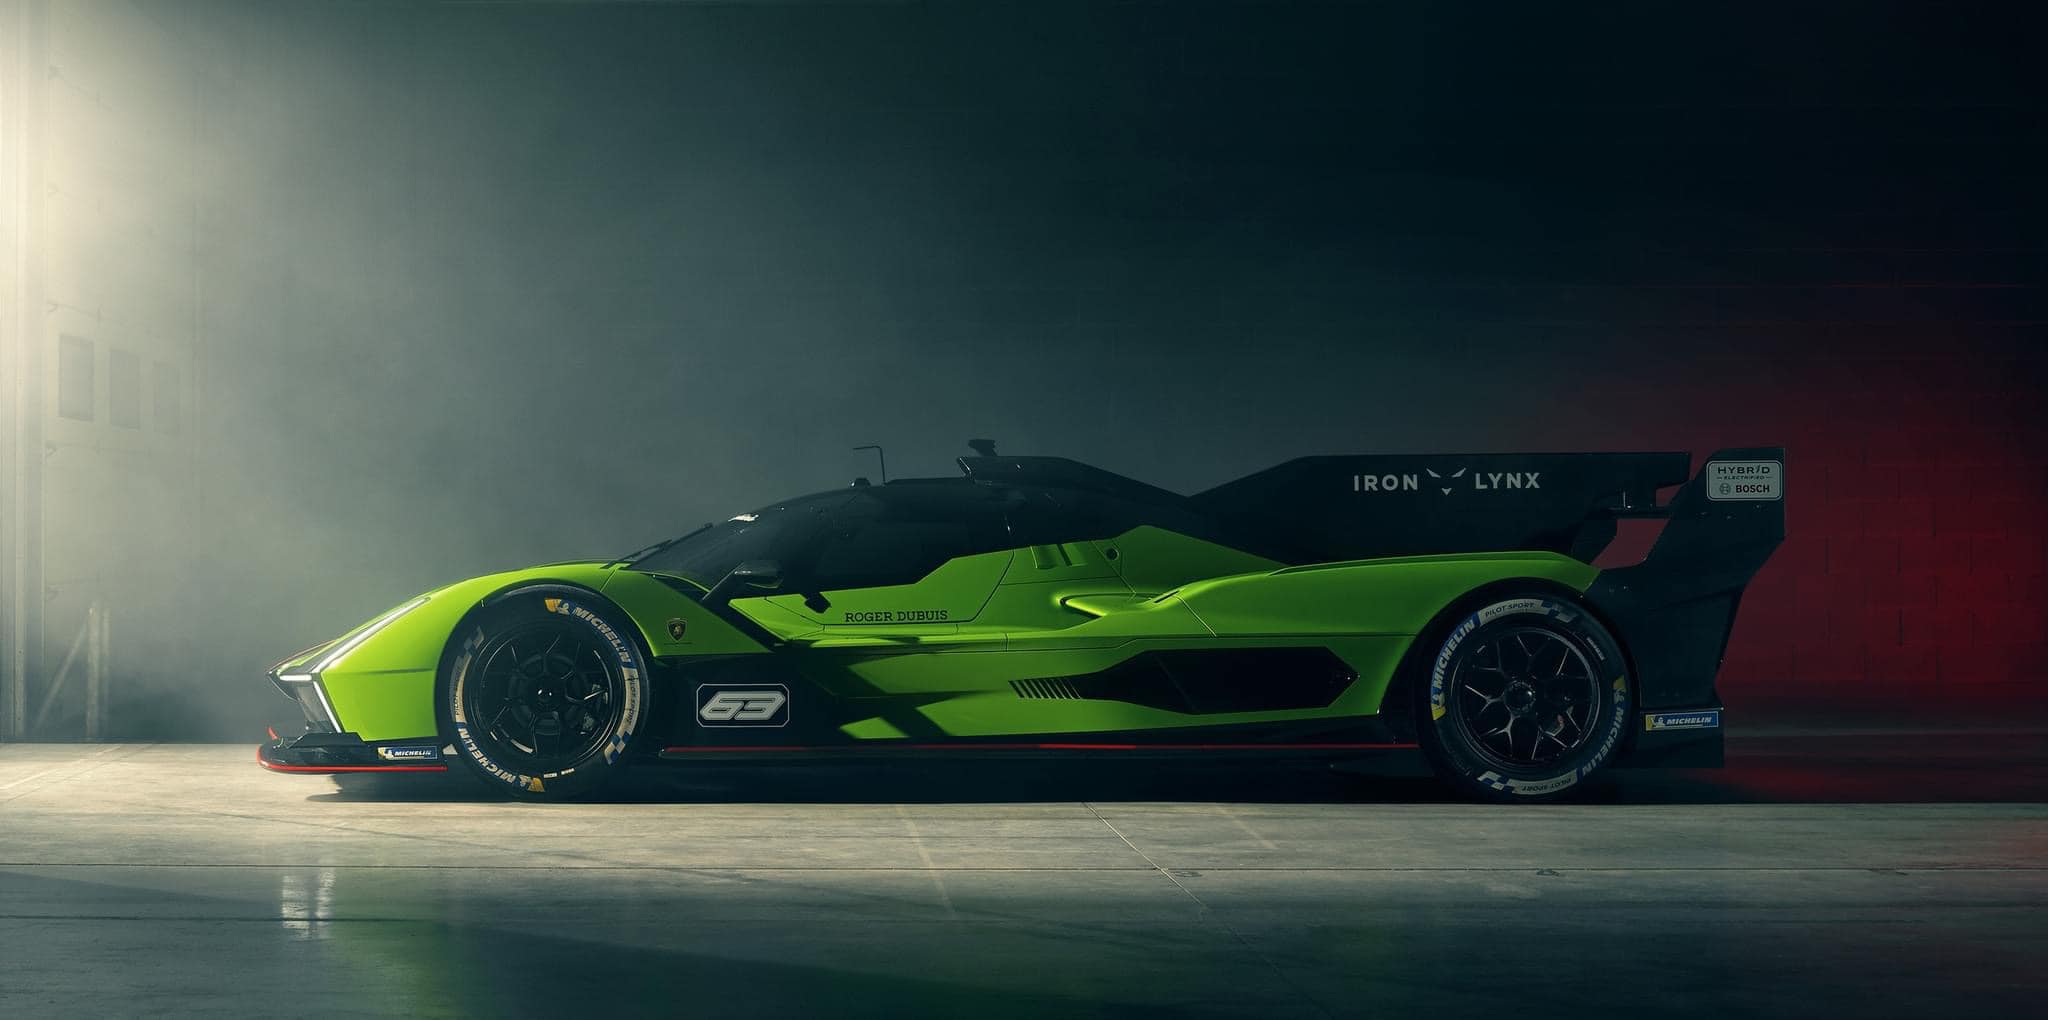 lamborghini iron lynx completes 1500km test; closer to being race ready